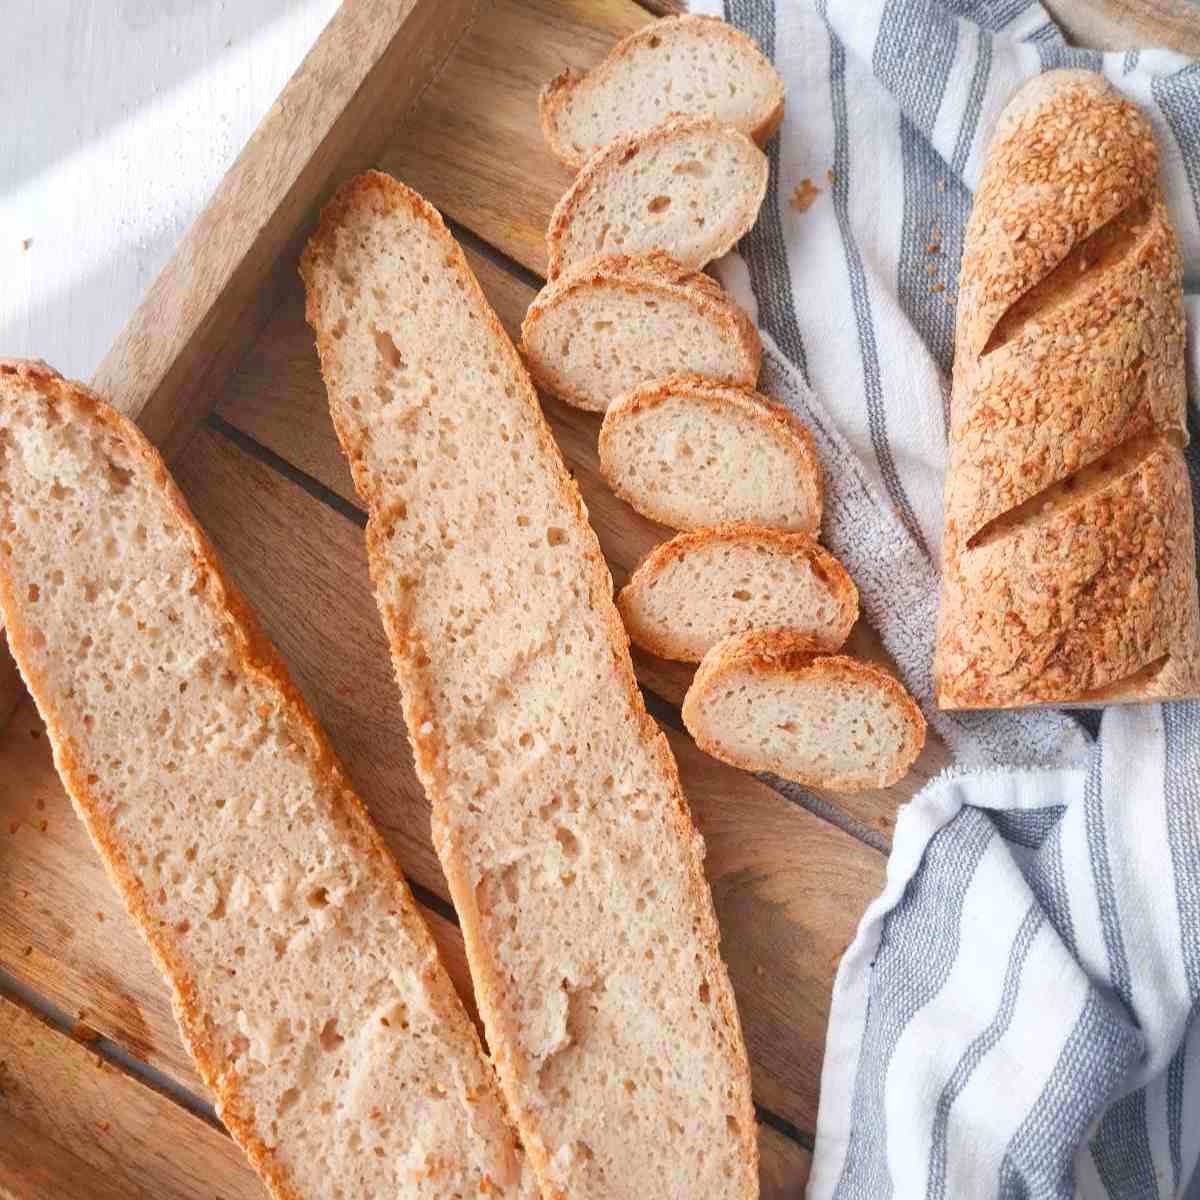 Gluten-free sourdough baguettes sliced on a wooden tray.